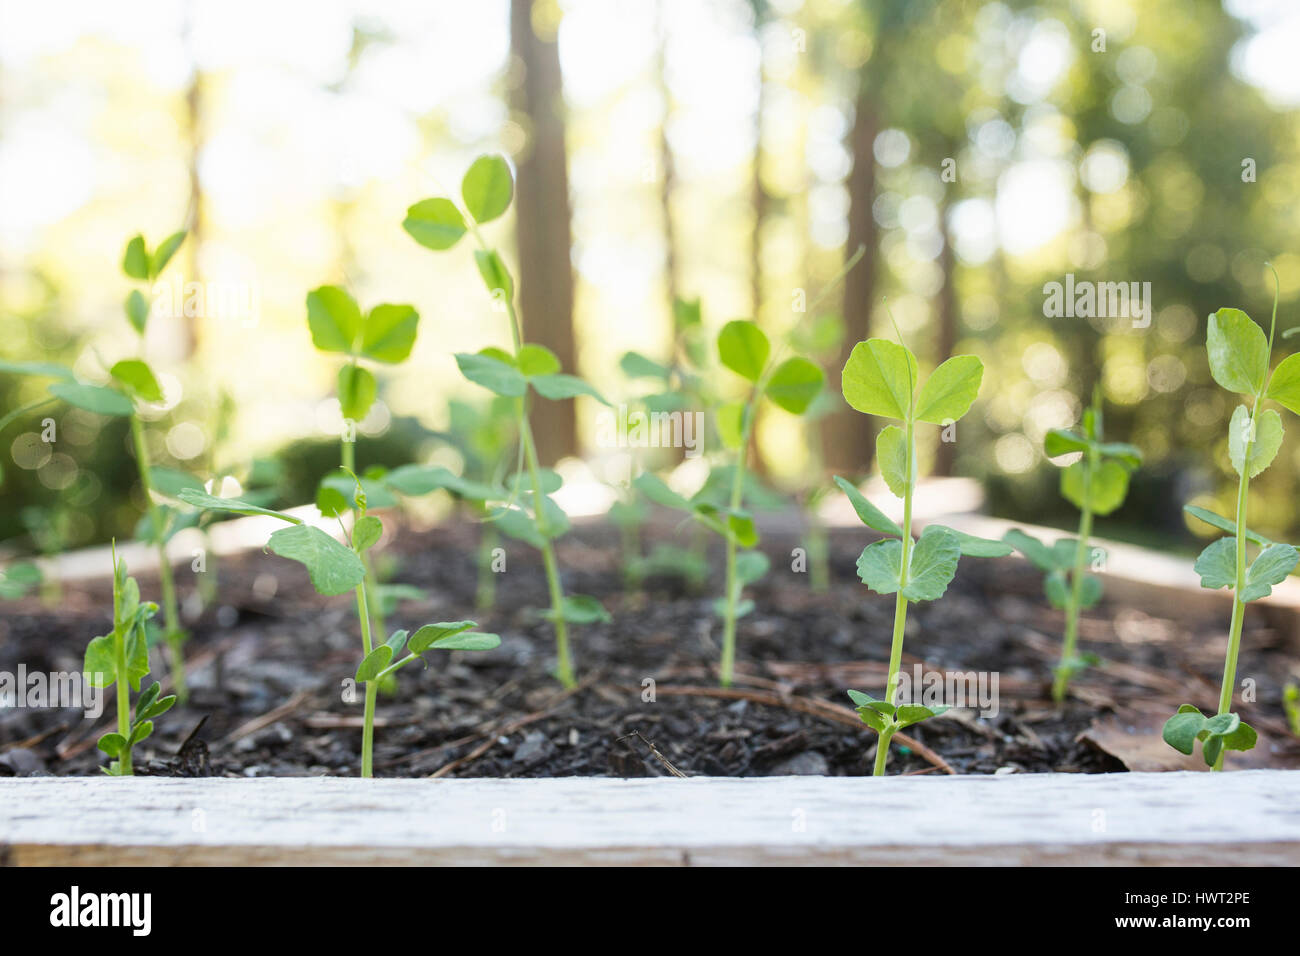 Close-up of seedlings growing outdoors Stock Photo